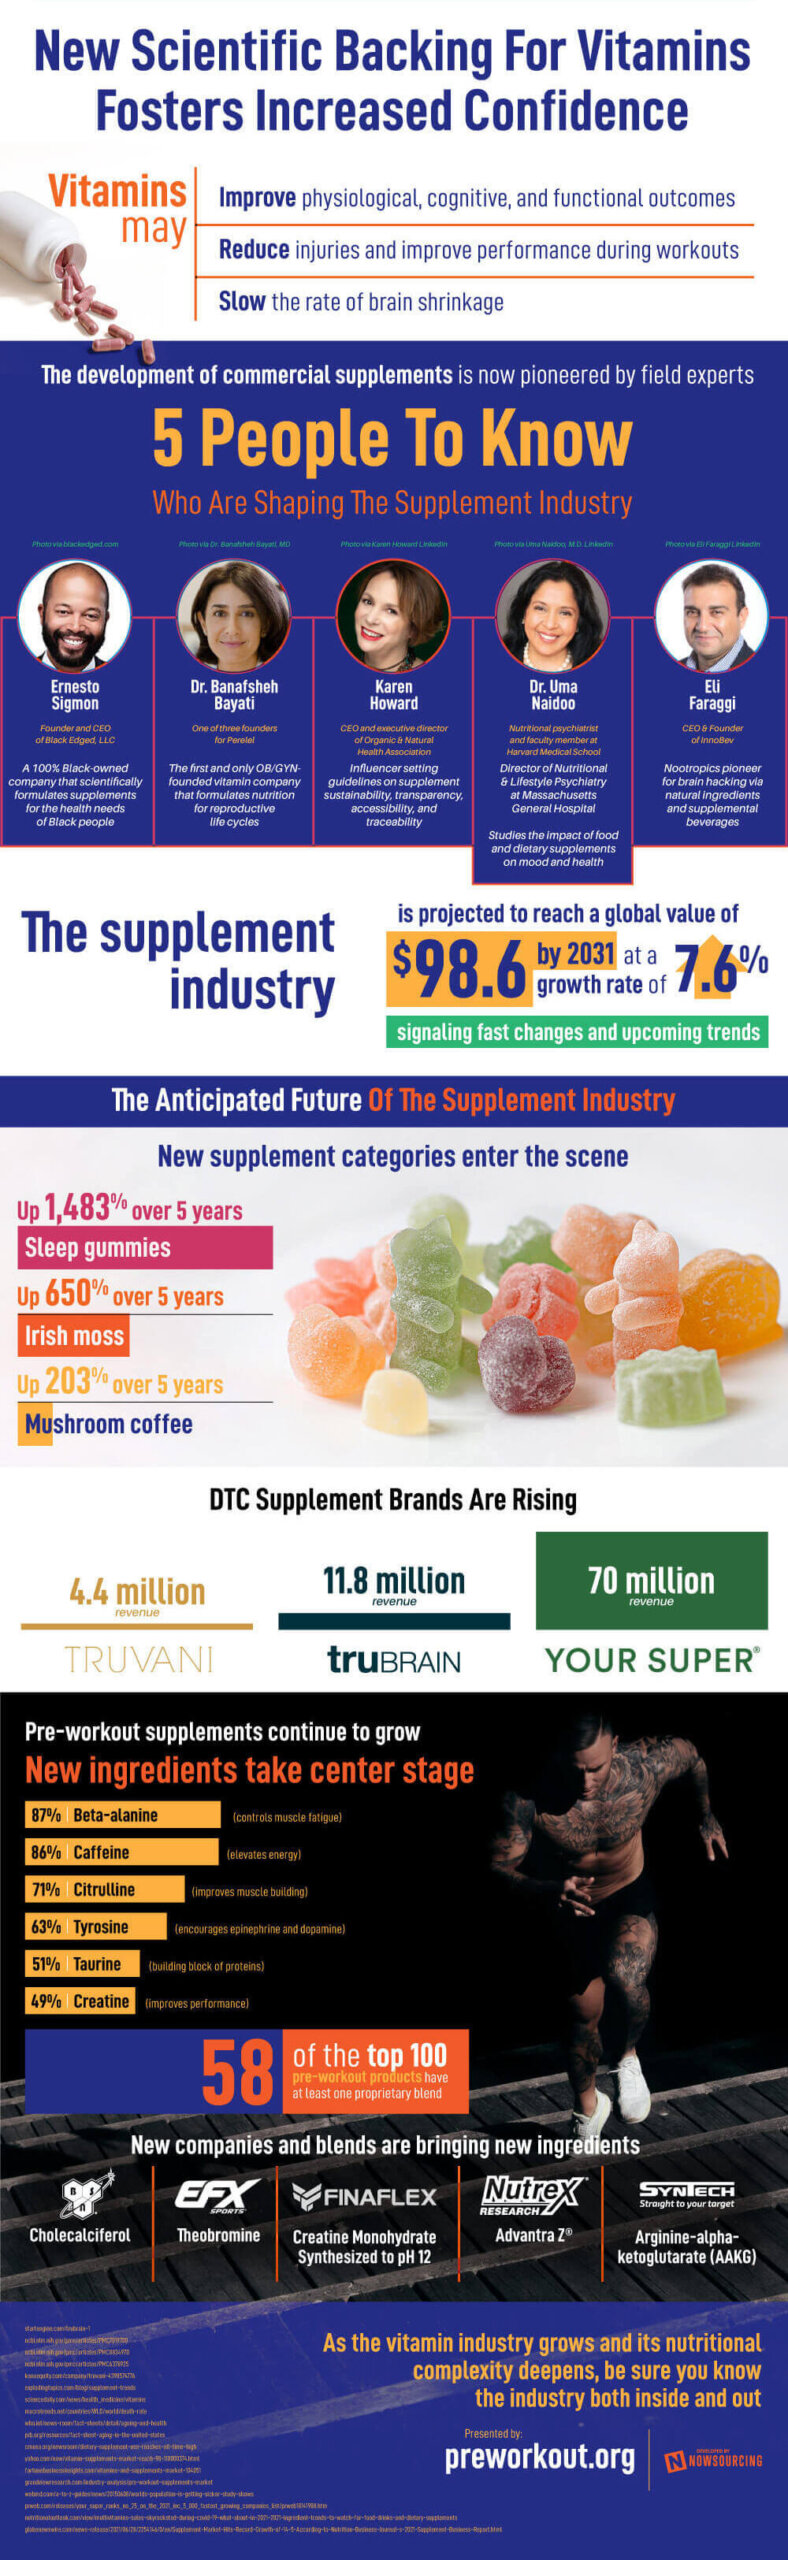 business-of-supplements